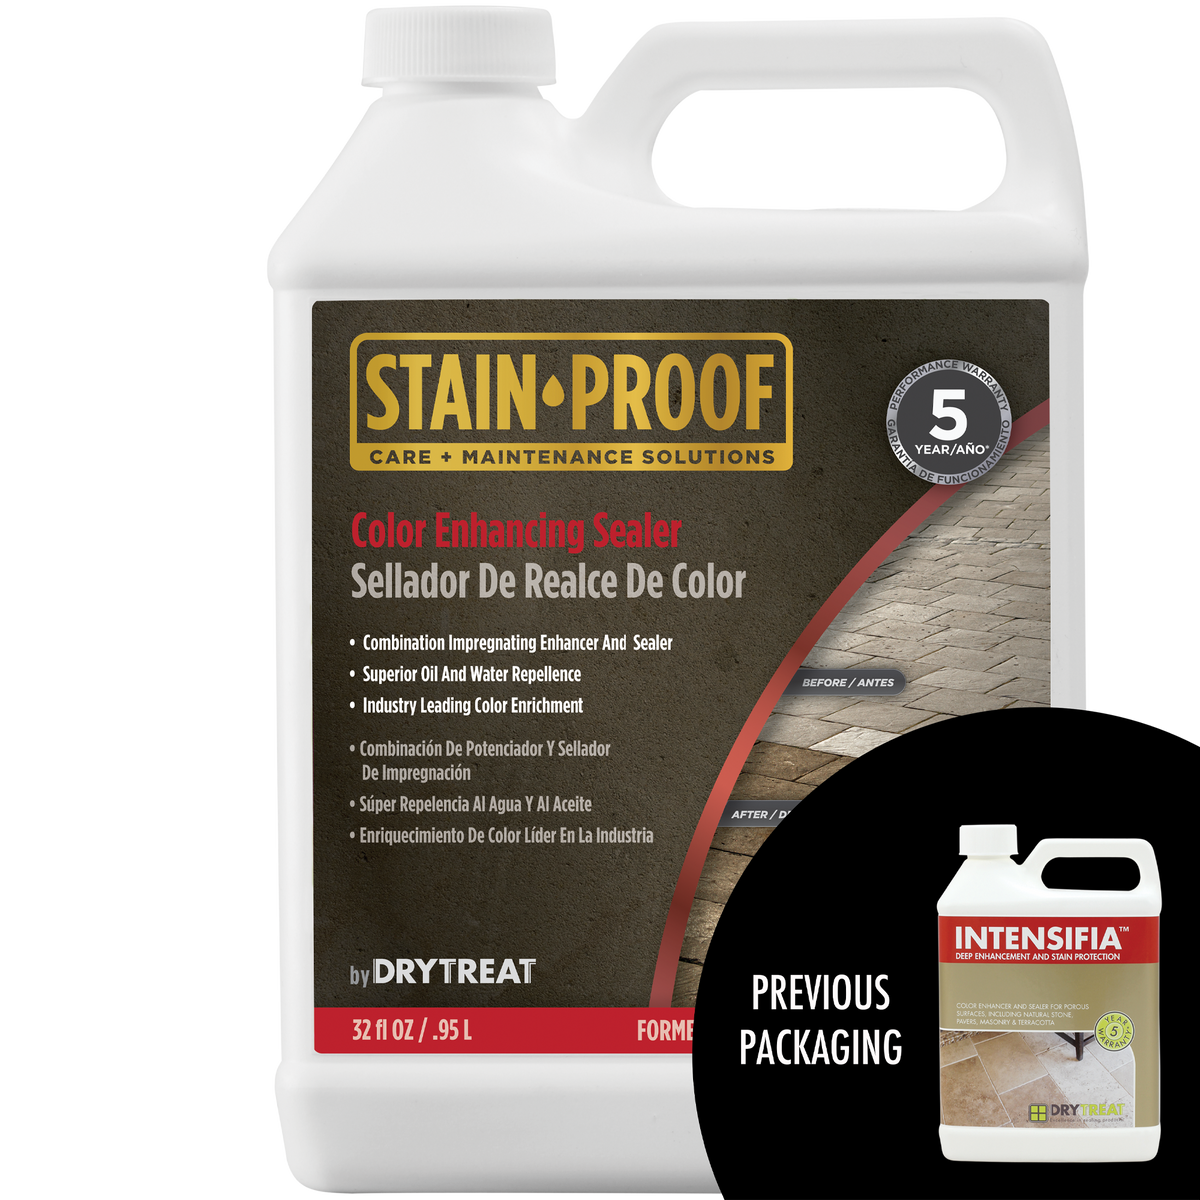 SELECT PAINTED SURFACE CARE- COMPOUND, POLISH, & SEALER (3 STEPS